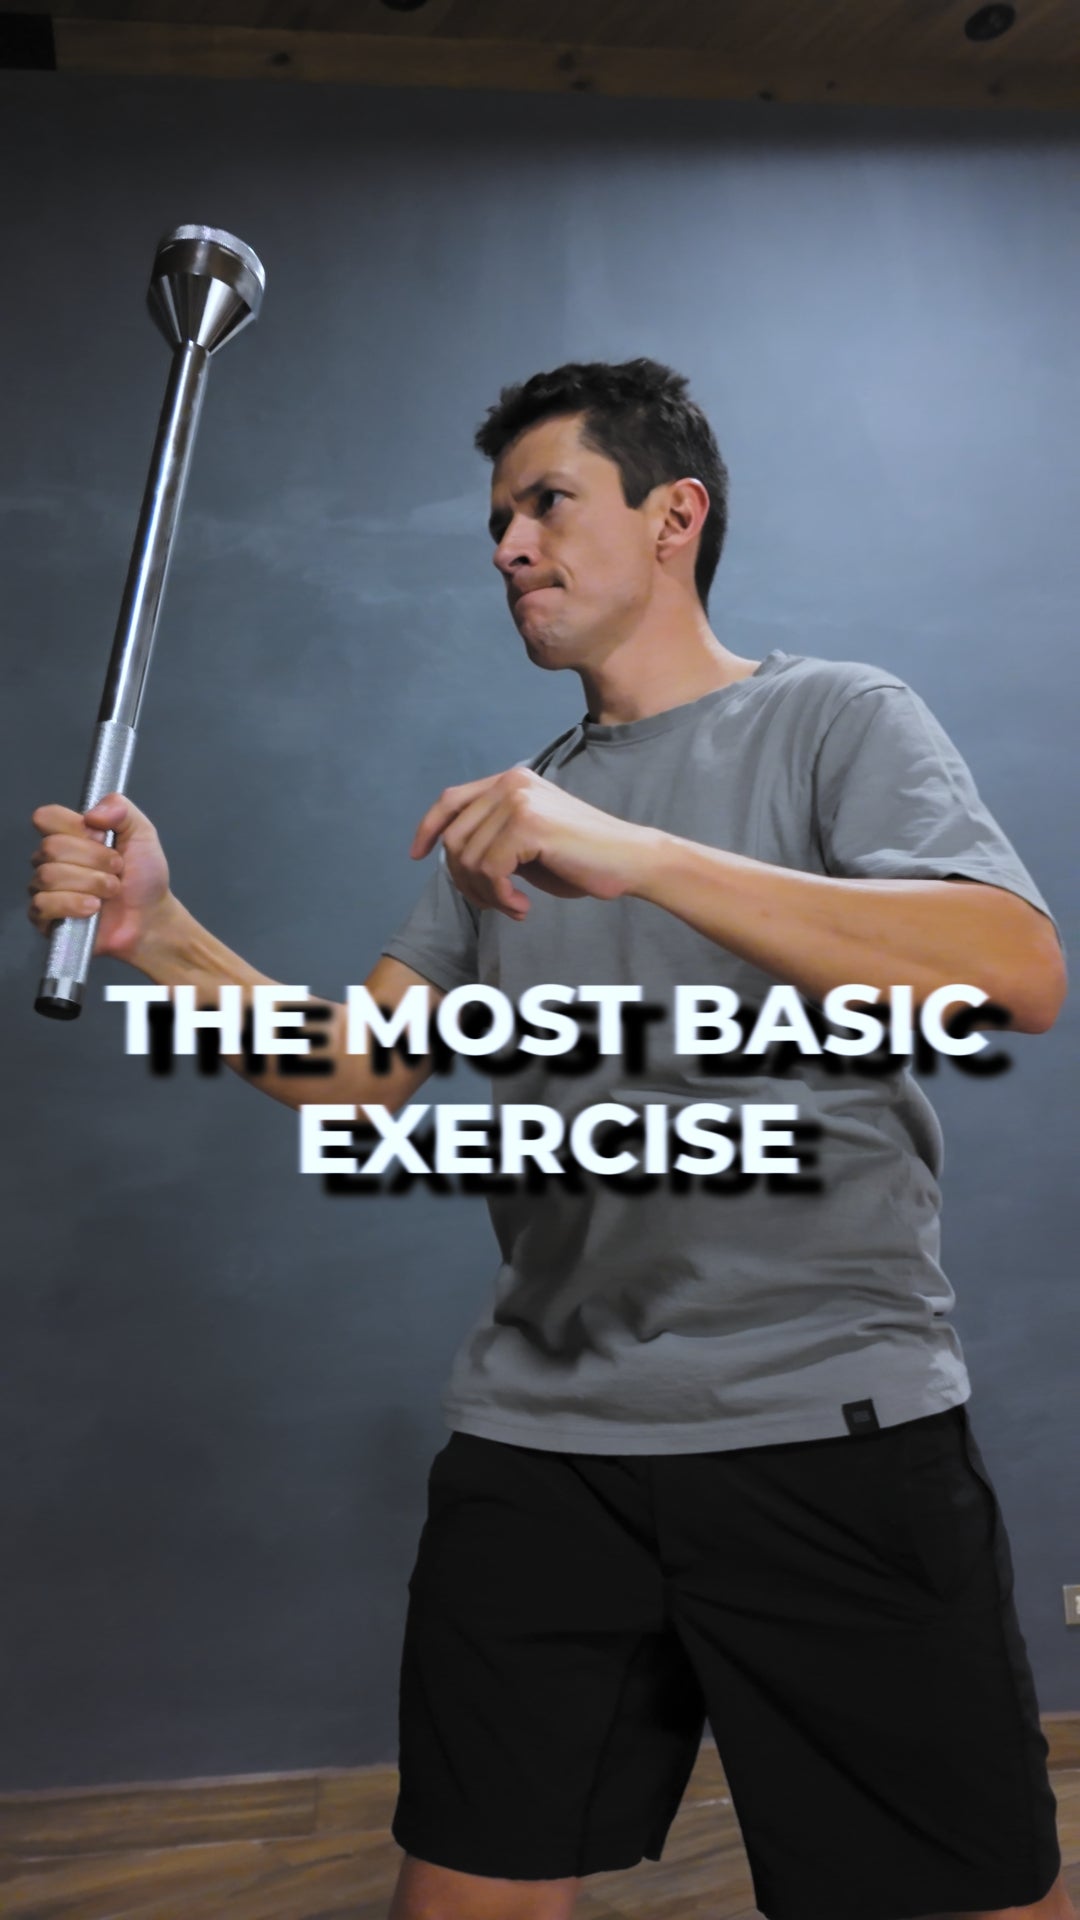 THE MOST BASIC EXERCISE WITH THE PARABELL